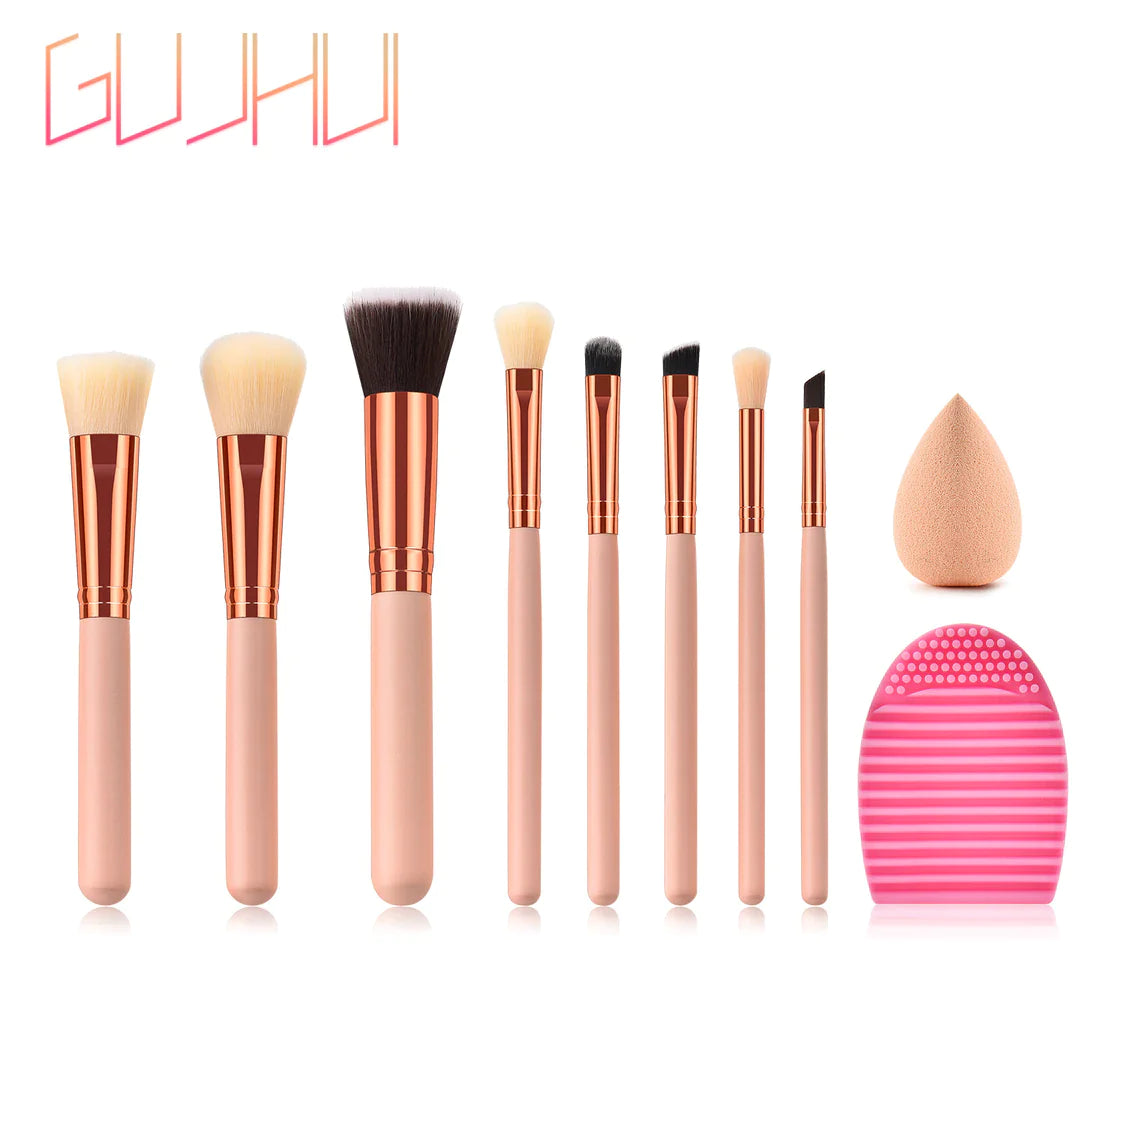 8 Makeup Brushes Beauty Tools Pink Gold Waterdrop Powder Puff Cleaning Egg Set GUJHUI